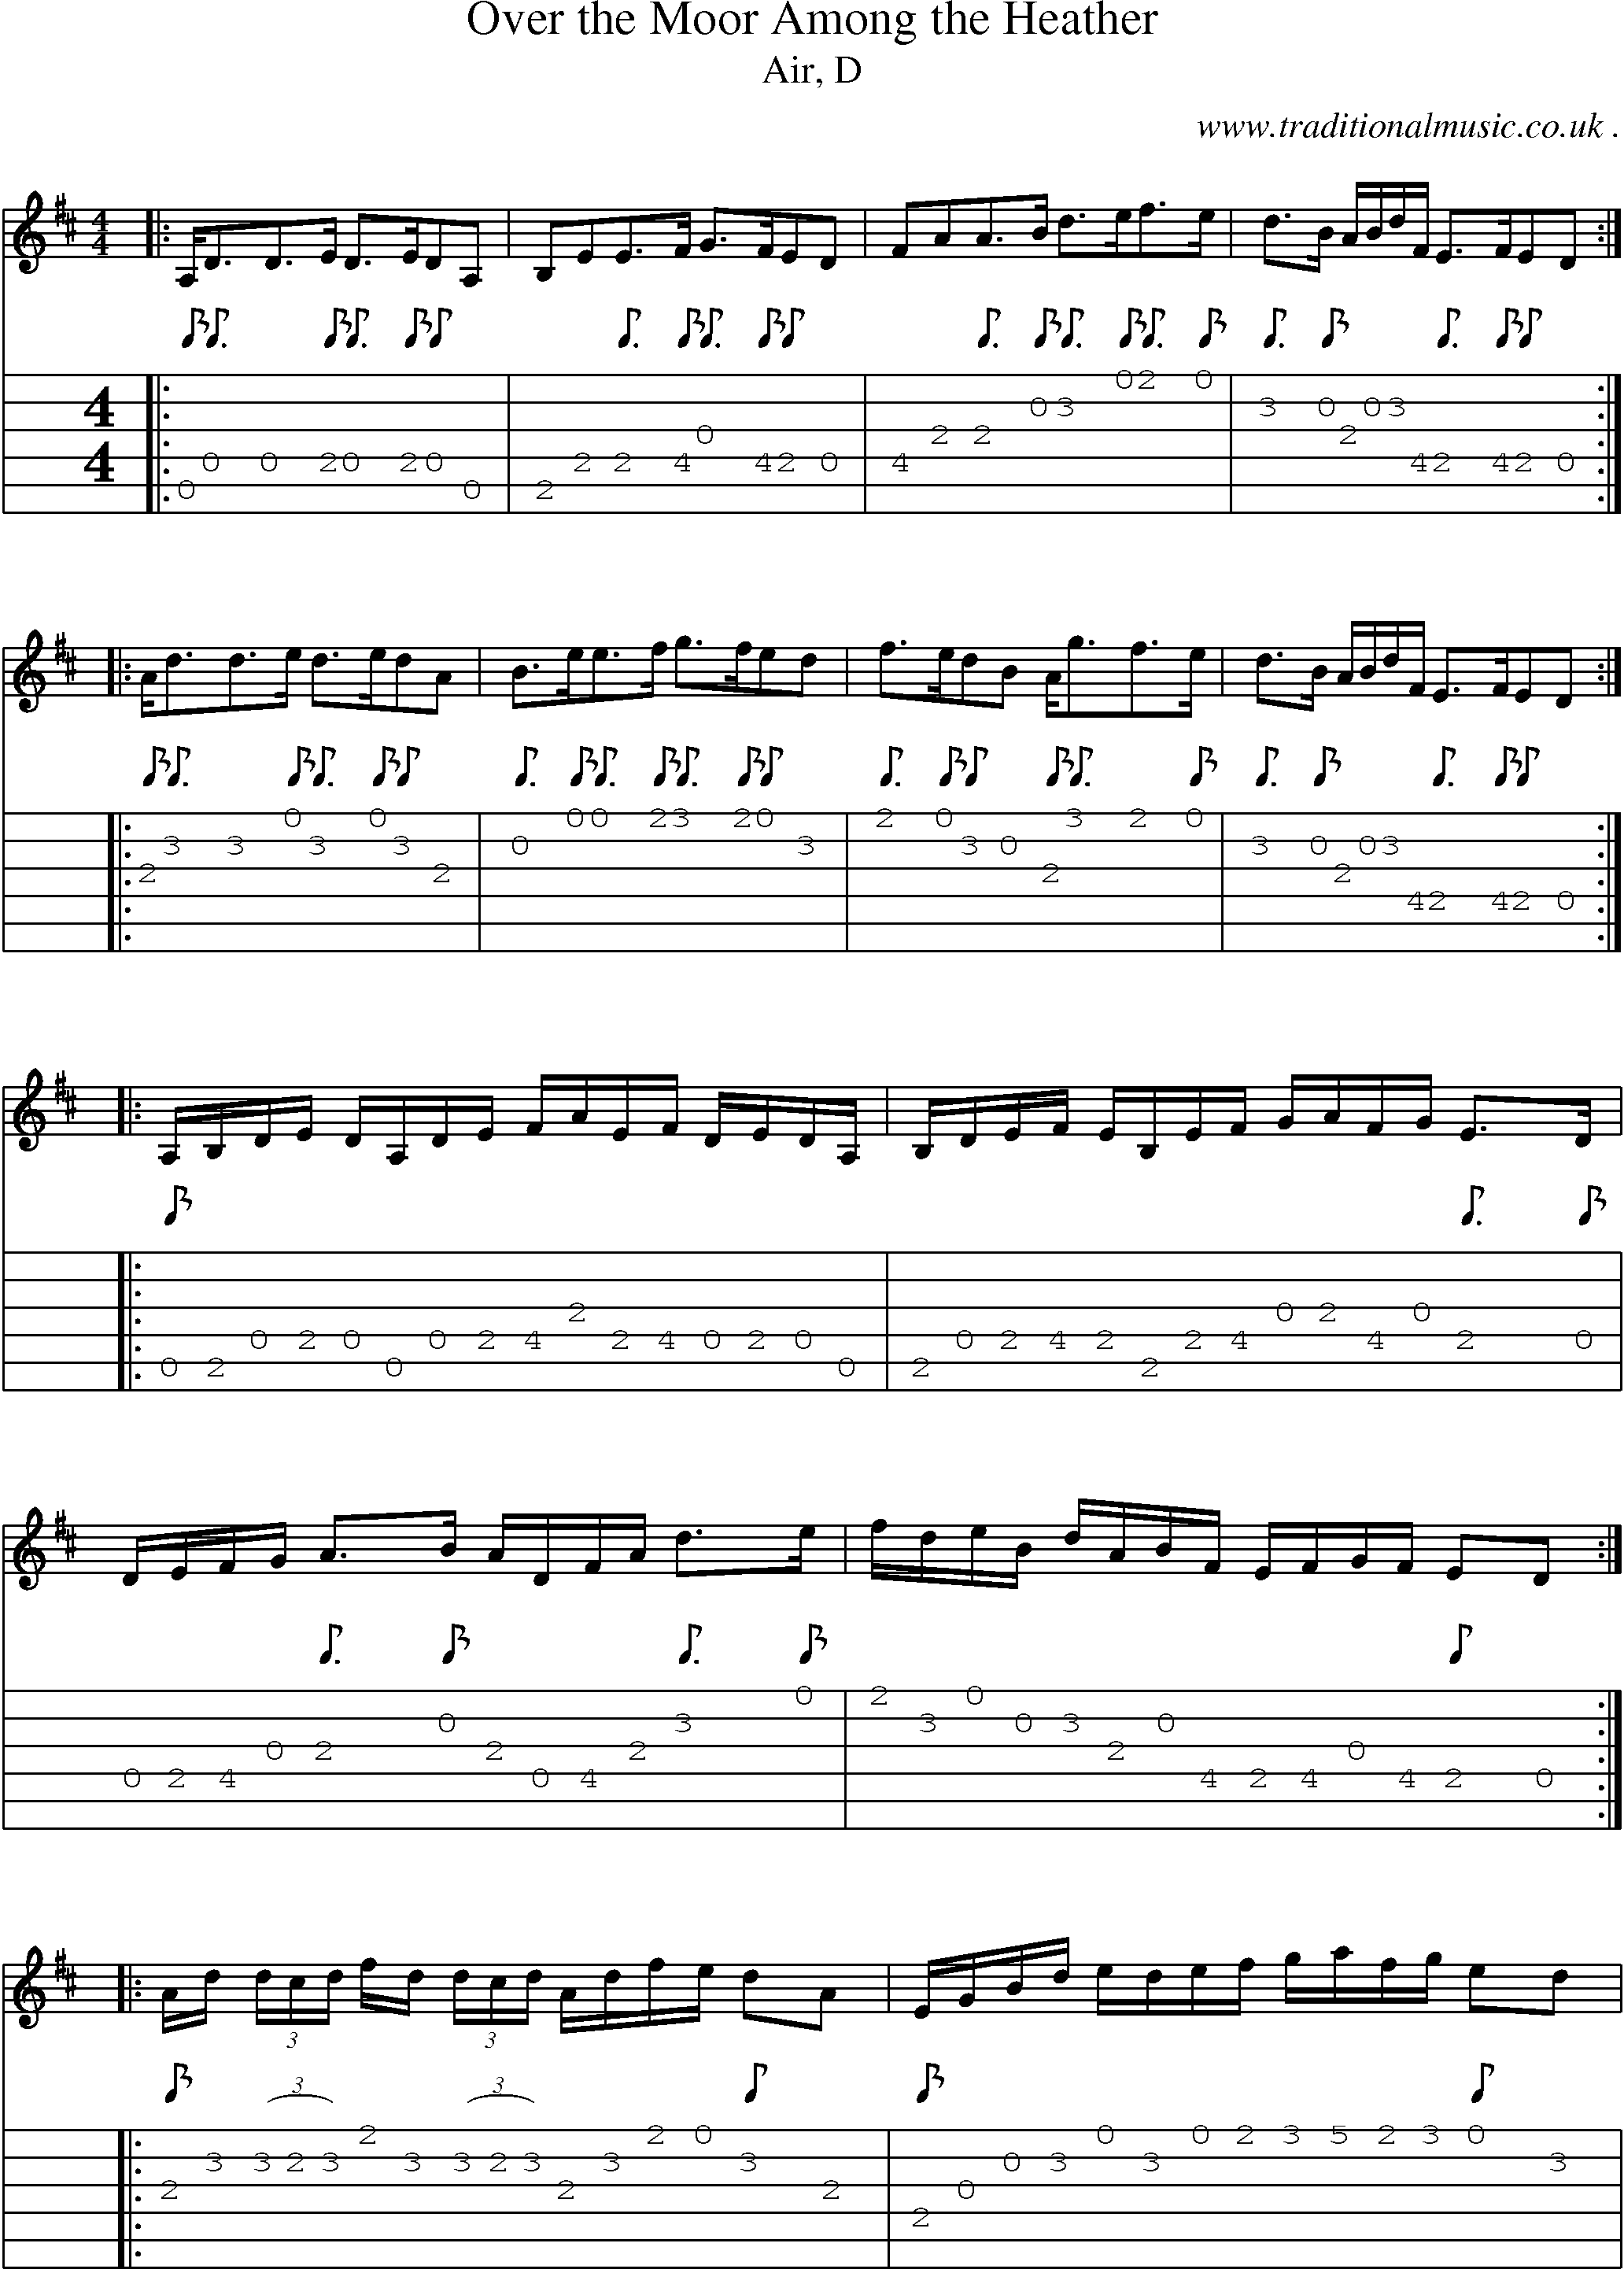 Sheet-music  score, Chords and Guitar Tabs for Over The Moor Among The Heather